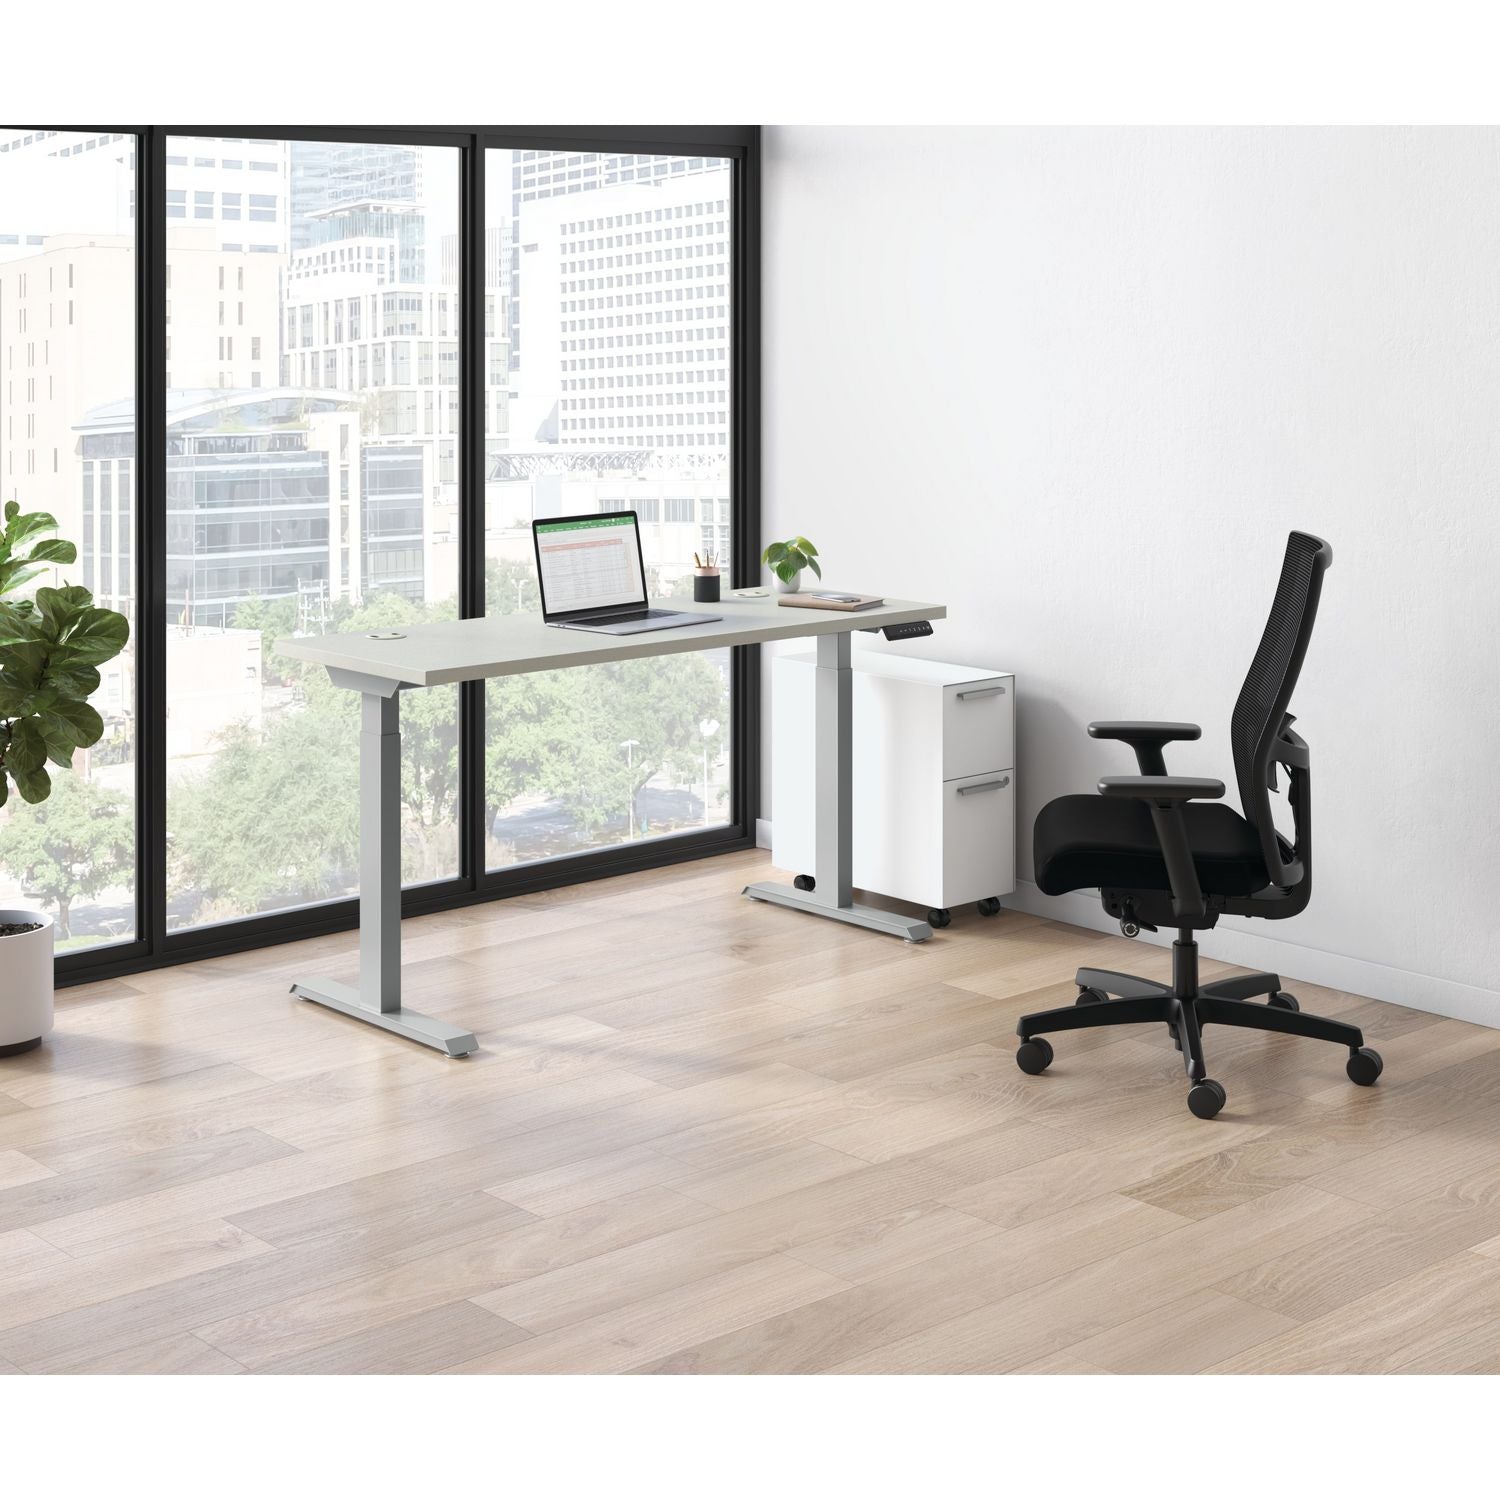 coordinate-height-adjustable-desk-bundle-2-stage-58-x-22-x-2775-to-47-silver-mesh\\silver-ships-in-7-10-business-days_honhat2smsv2258 - 6